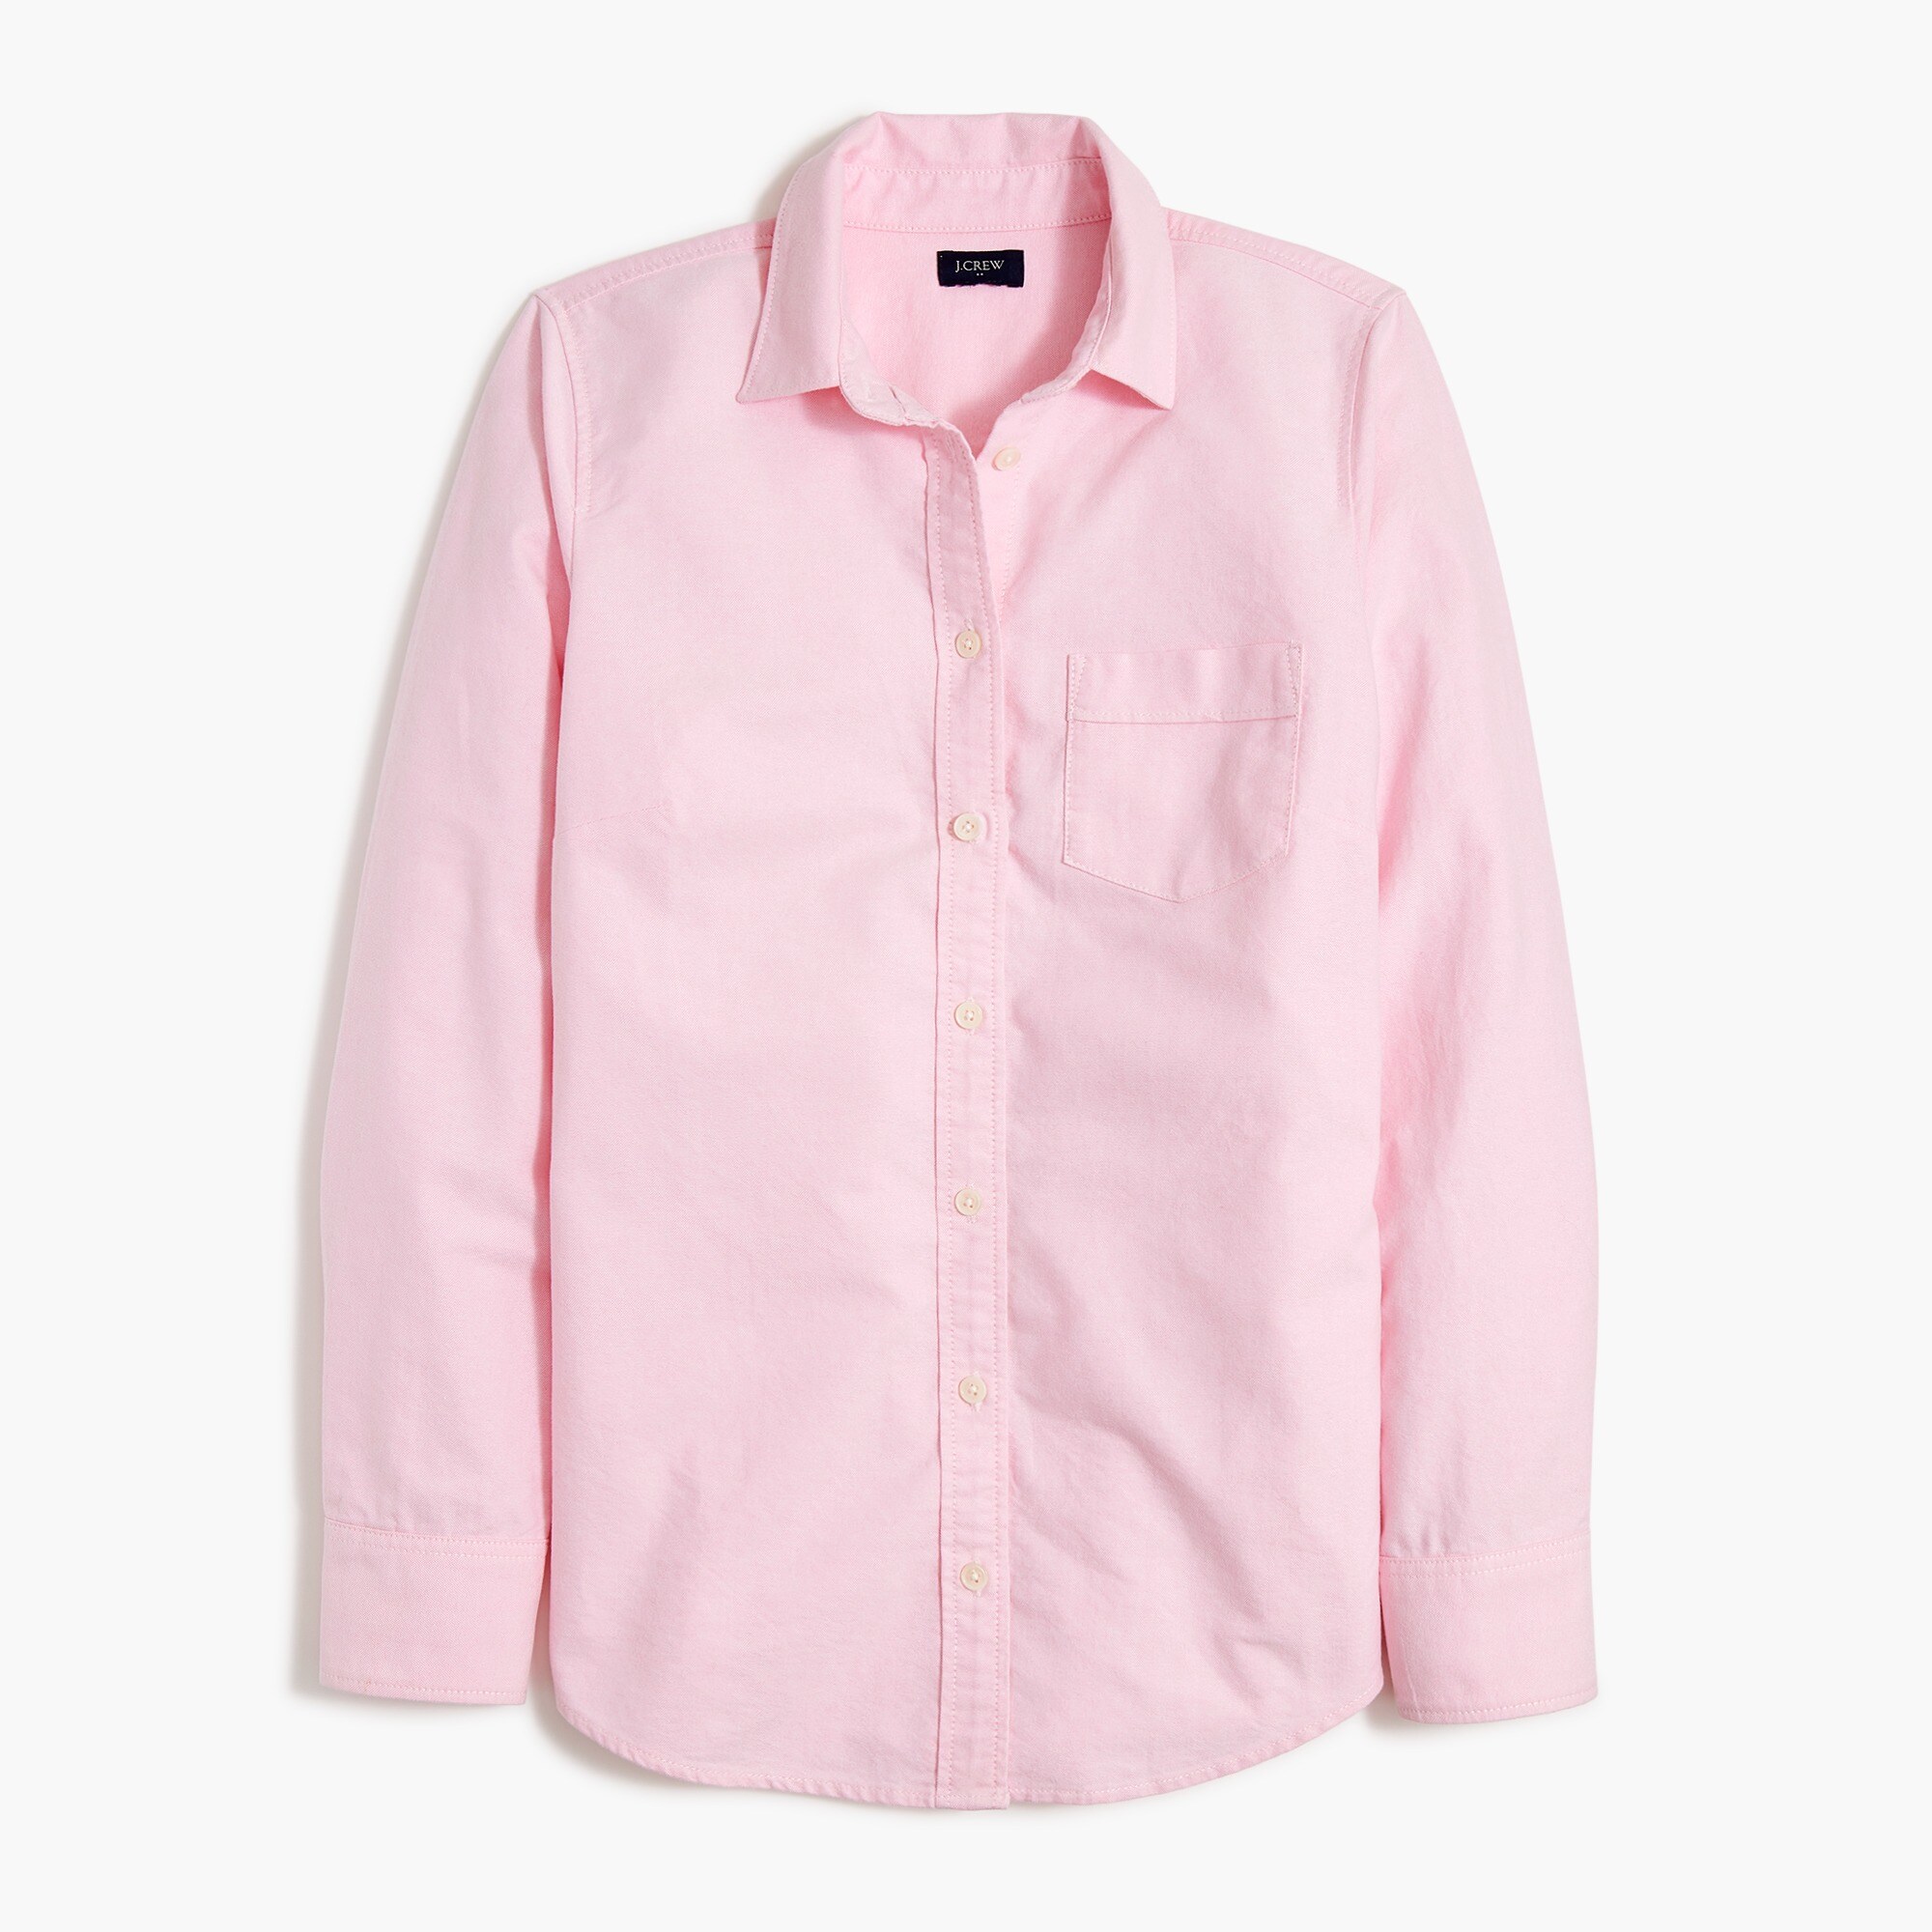 Jcrew Petite button-up oxford shirt in signature fit